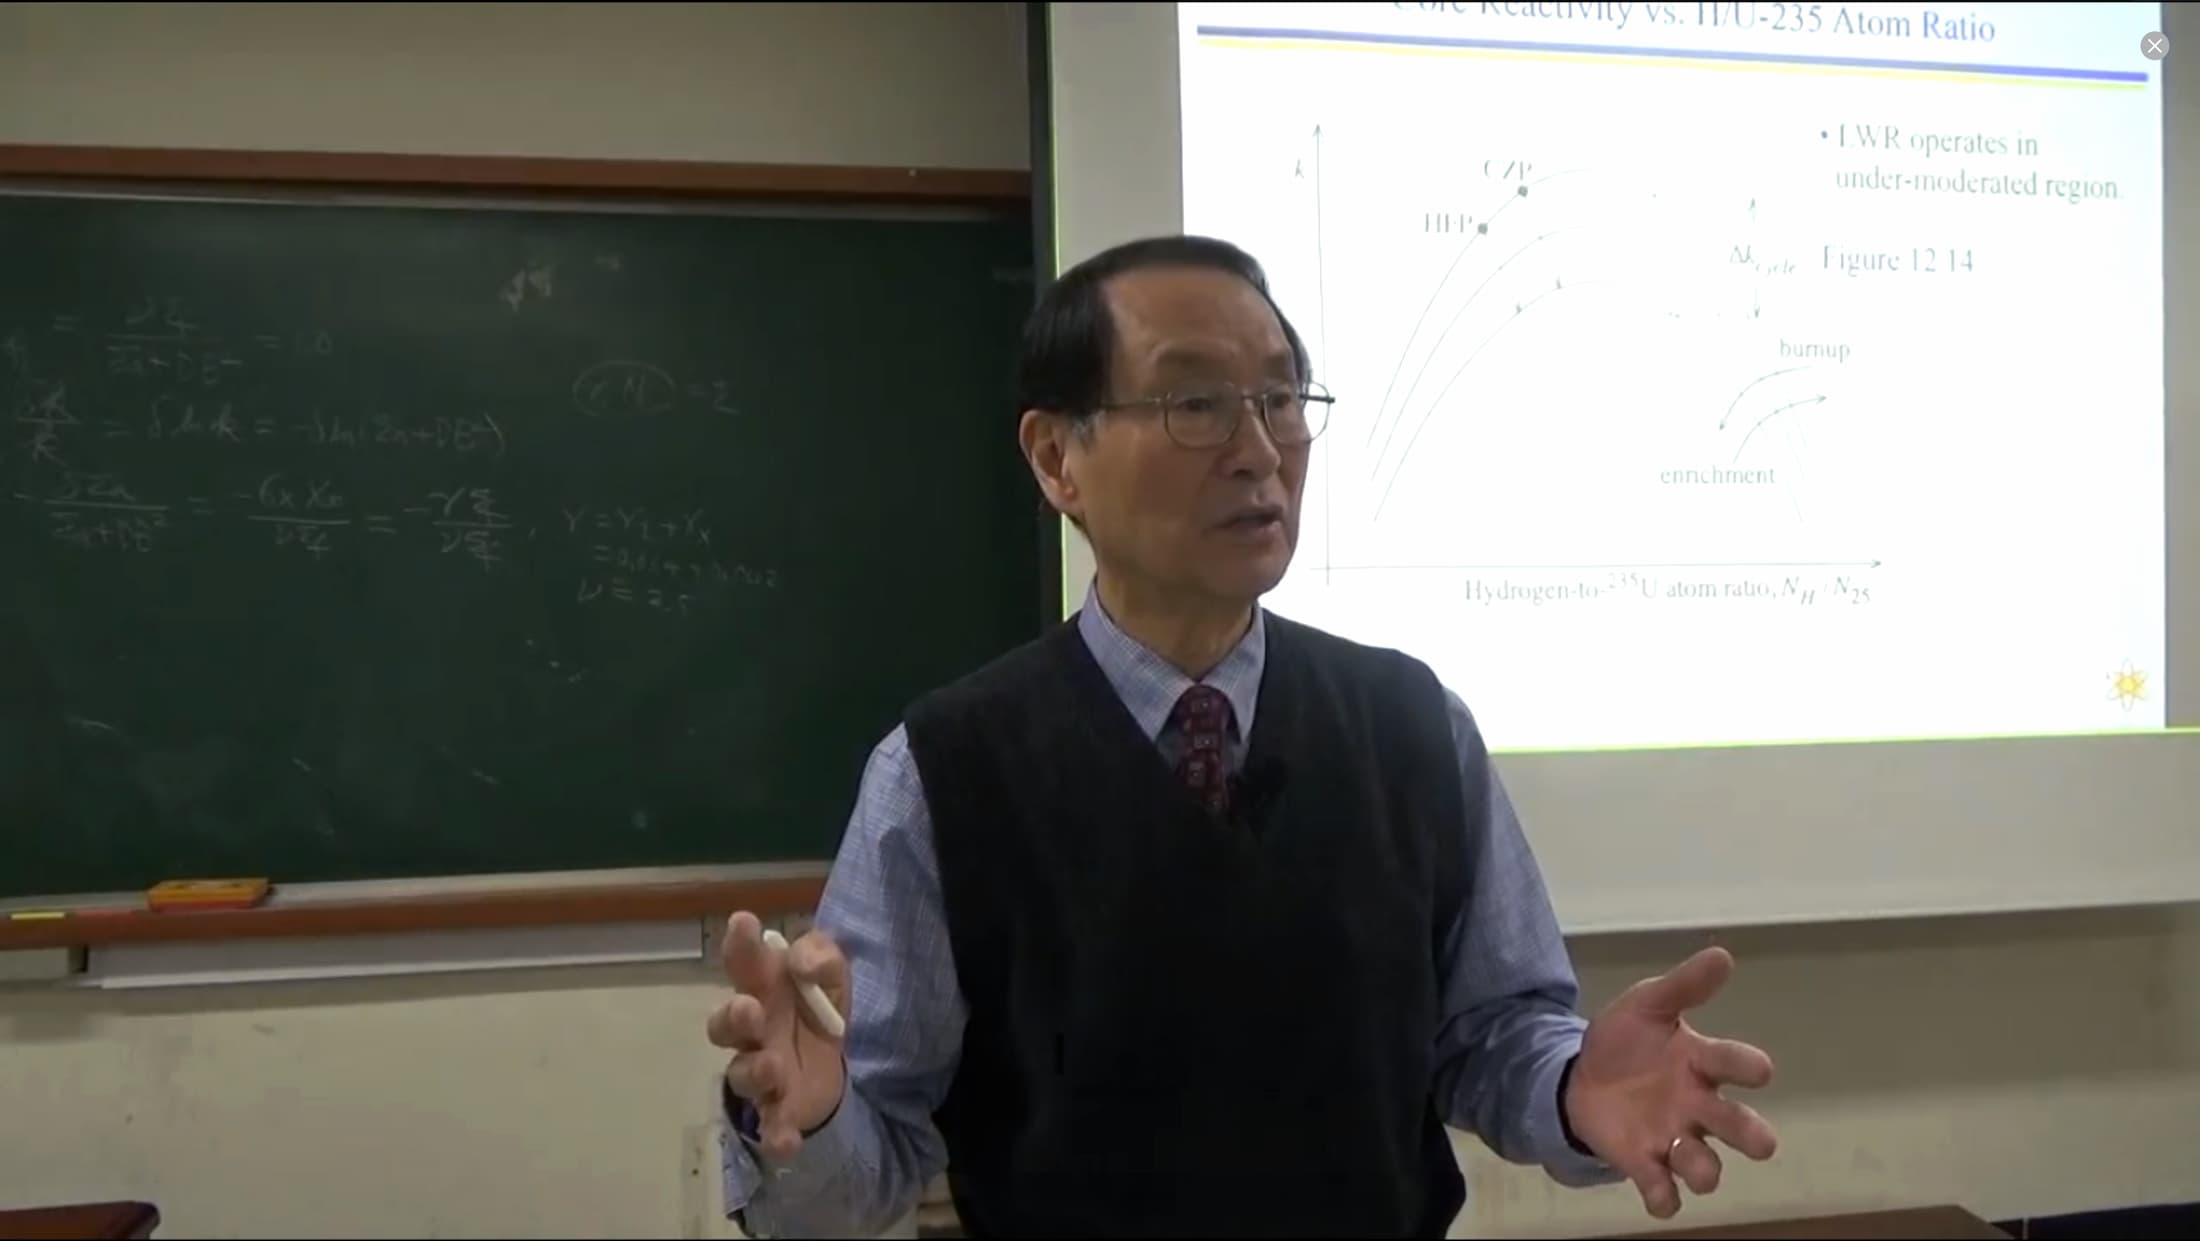 man speaking in front of a chalkboard and projector screen